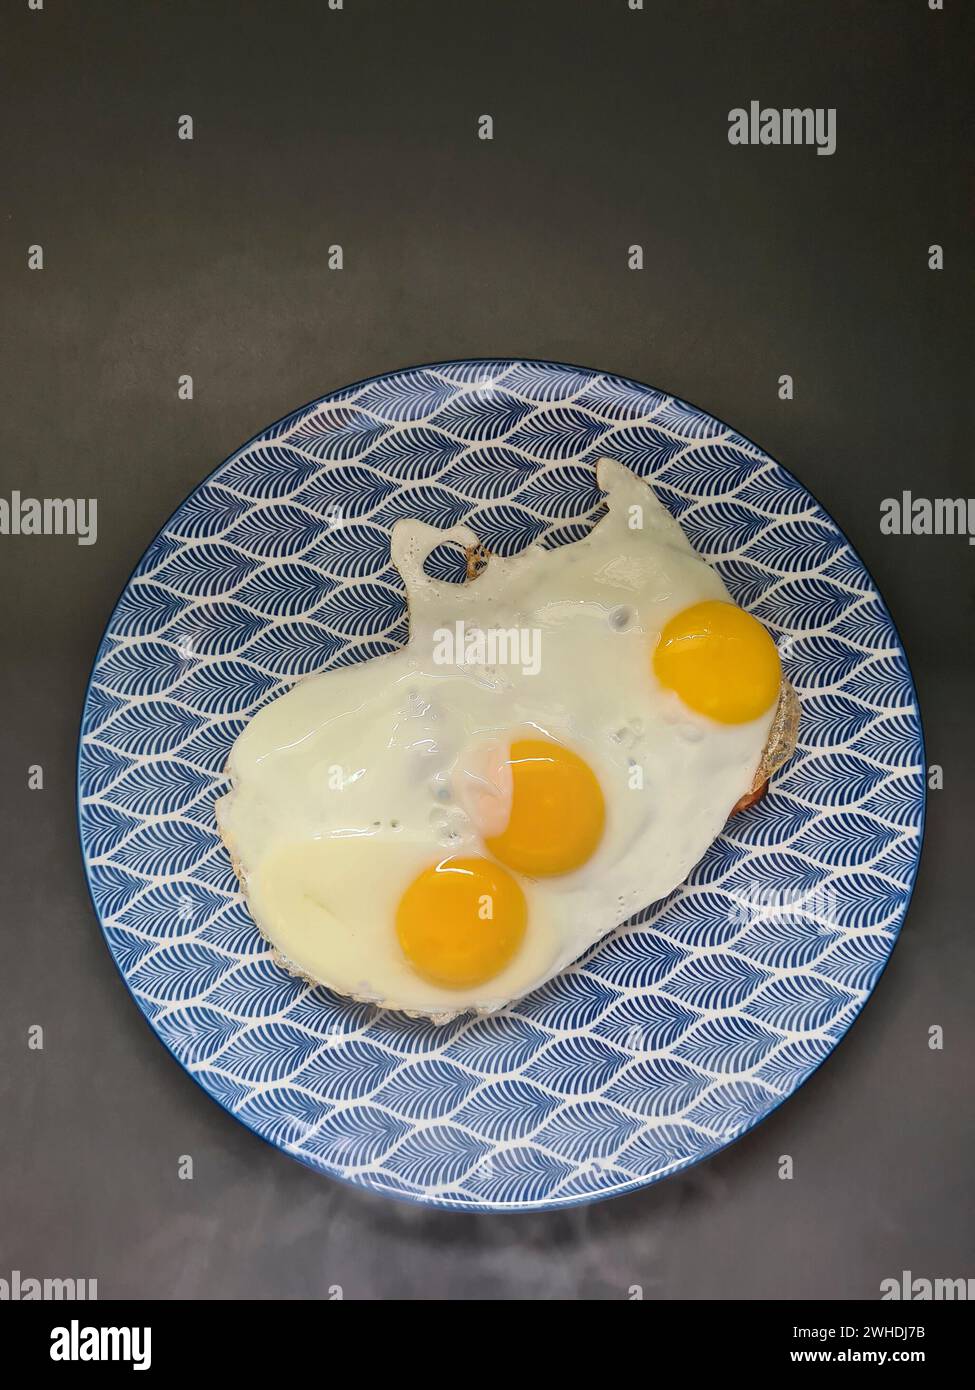 three fried eggs on a blue and white plate Stock Photo